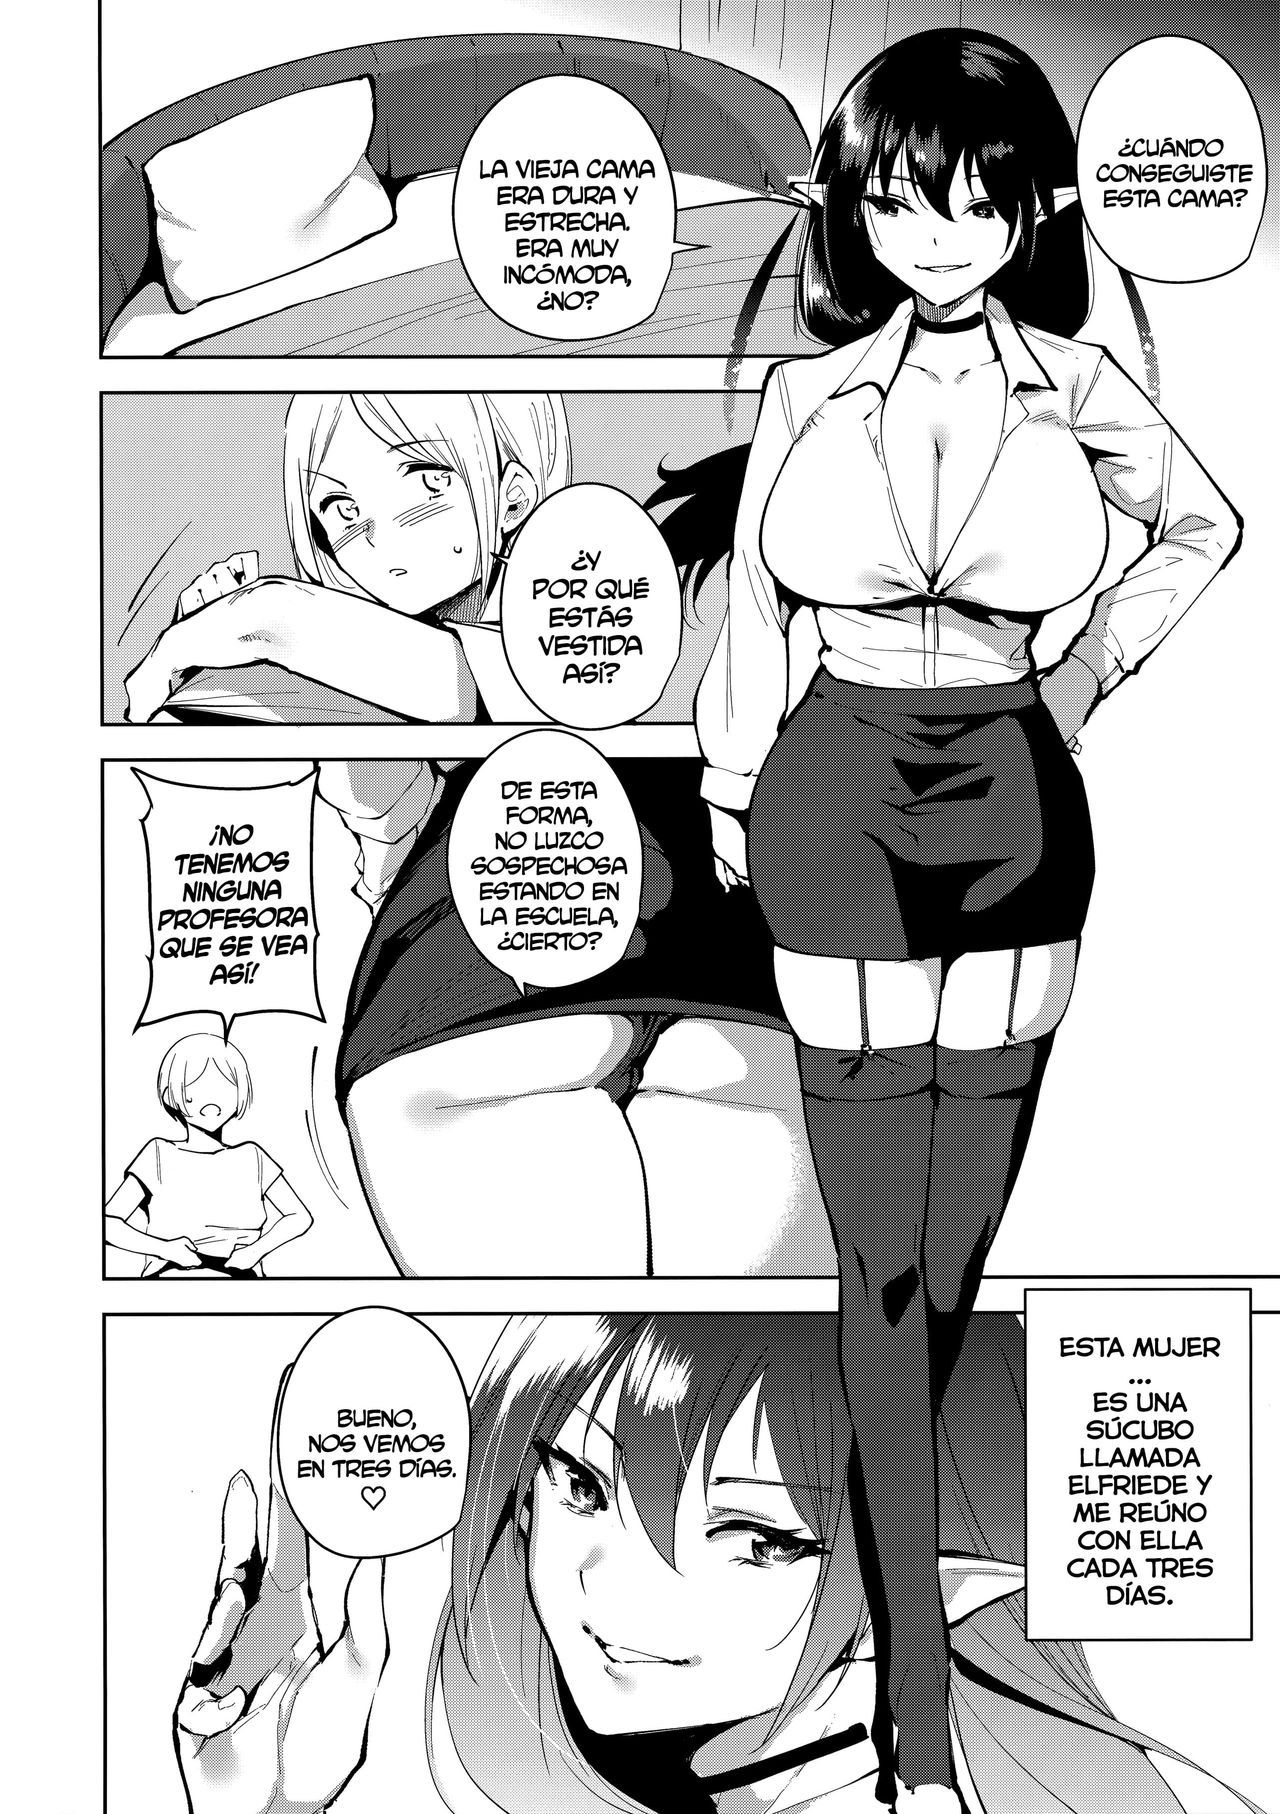 The-Evil-of-Commons-2-Hentai-08.jpg